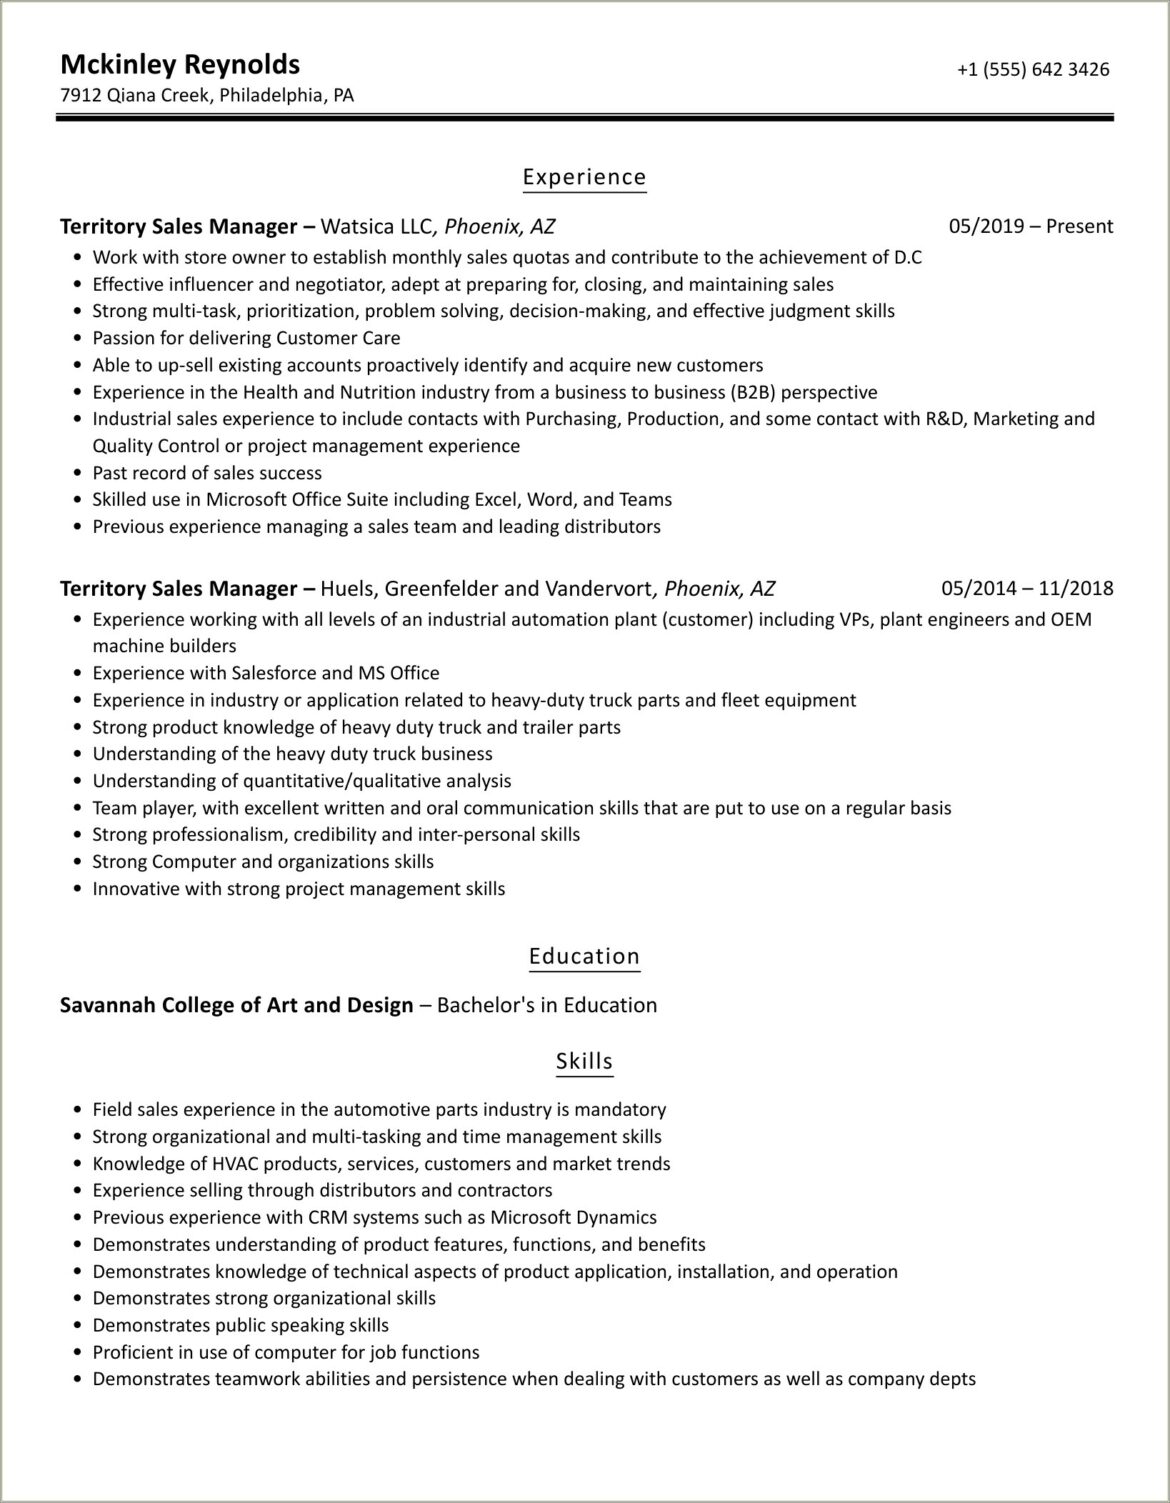 Sample Resume For Medical Territory Sales Manager